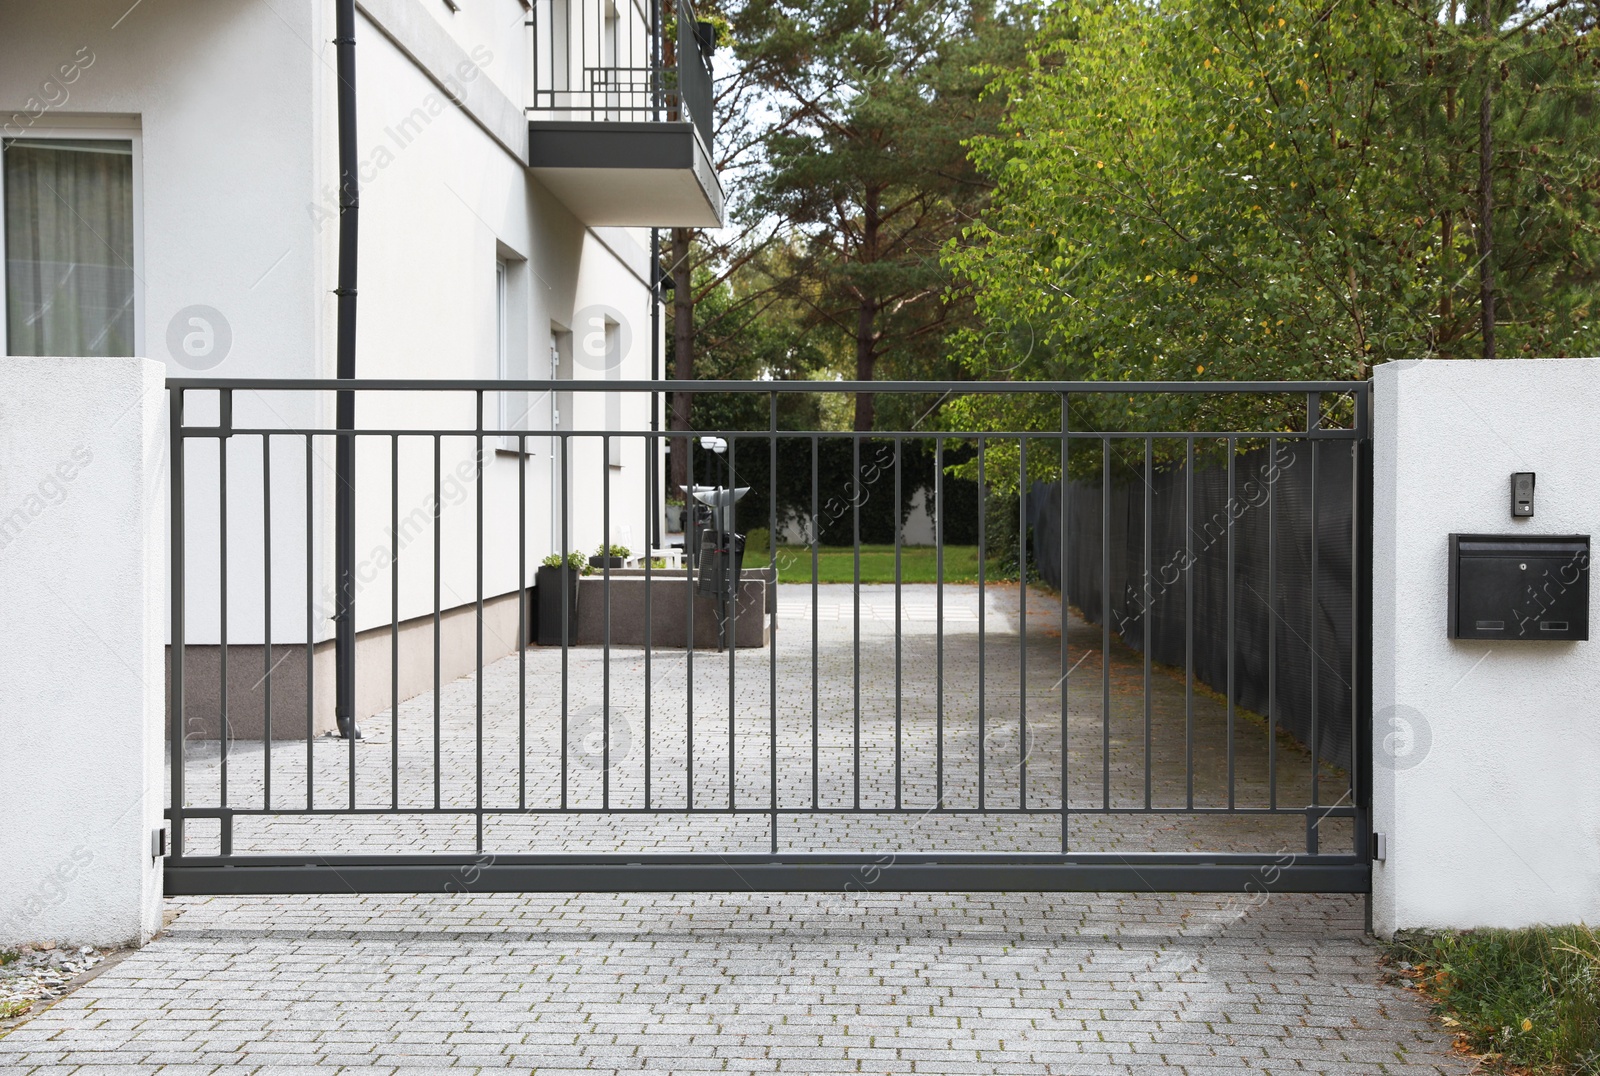 Photo of Closed metal gates near beautiful trees and building outdoors